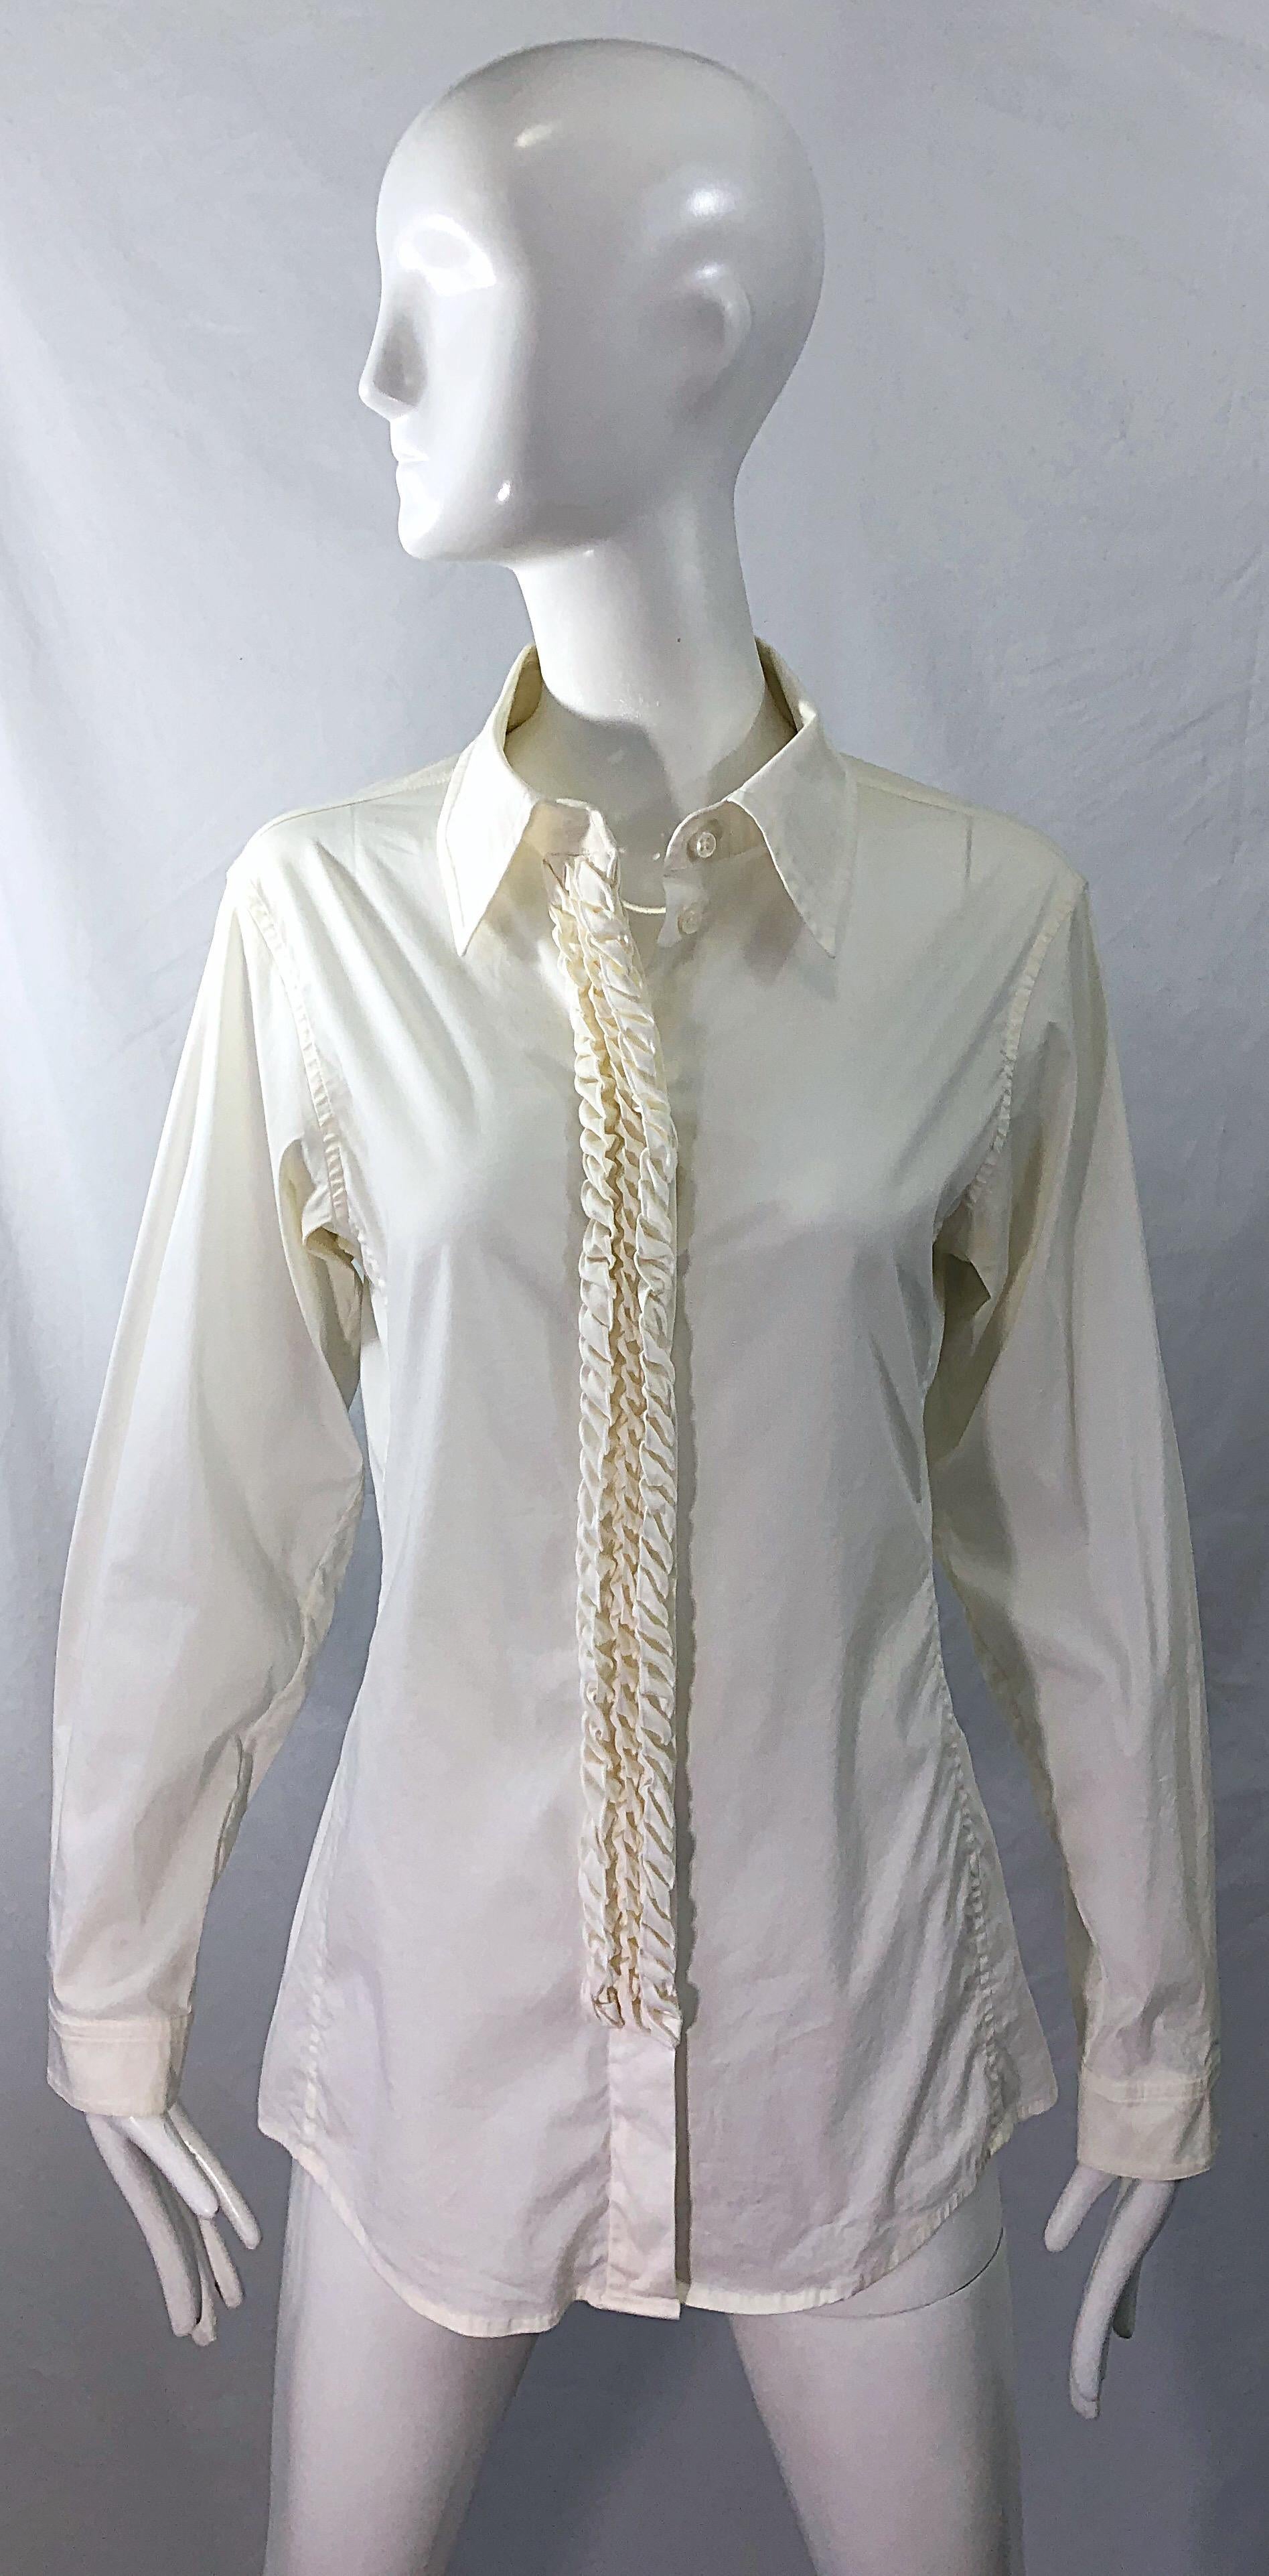 Chic and timeless YVES SAINT LAURENT Rive Gauche by TOM FORD ivory / off-white women's cotton / lycra long sleeve tuxedo style blouse ! Hidden buttons up the front. Can be worn many different ways, dressed up or down. Would look chic with a smoking